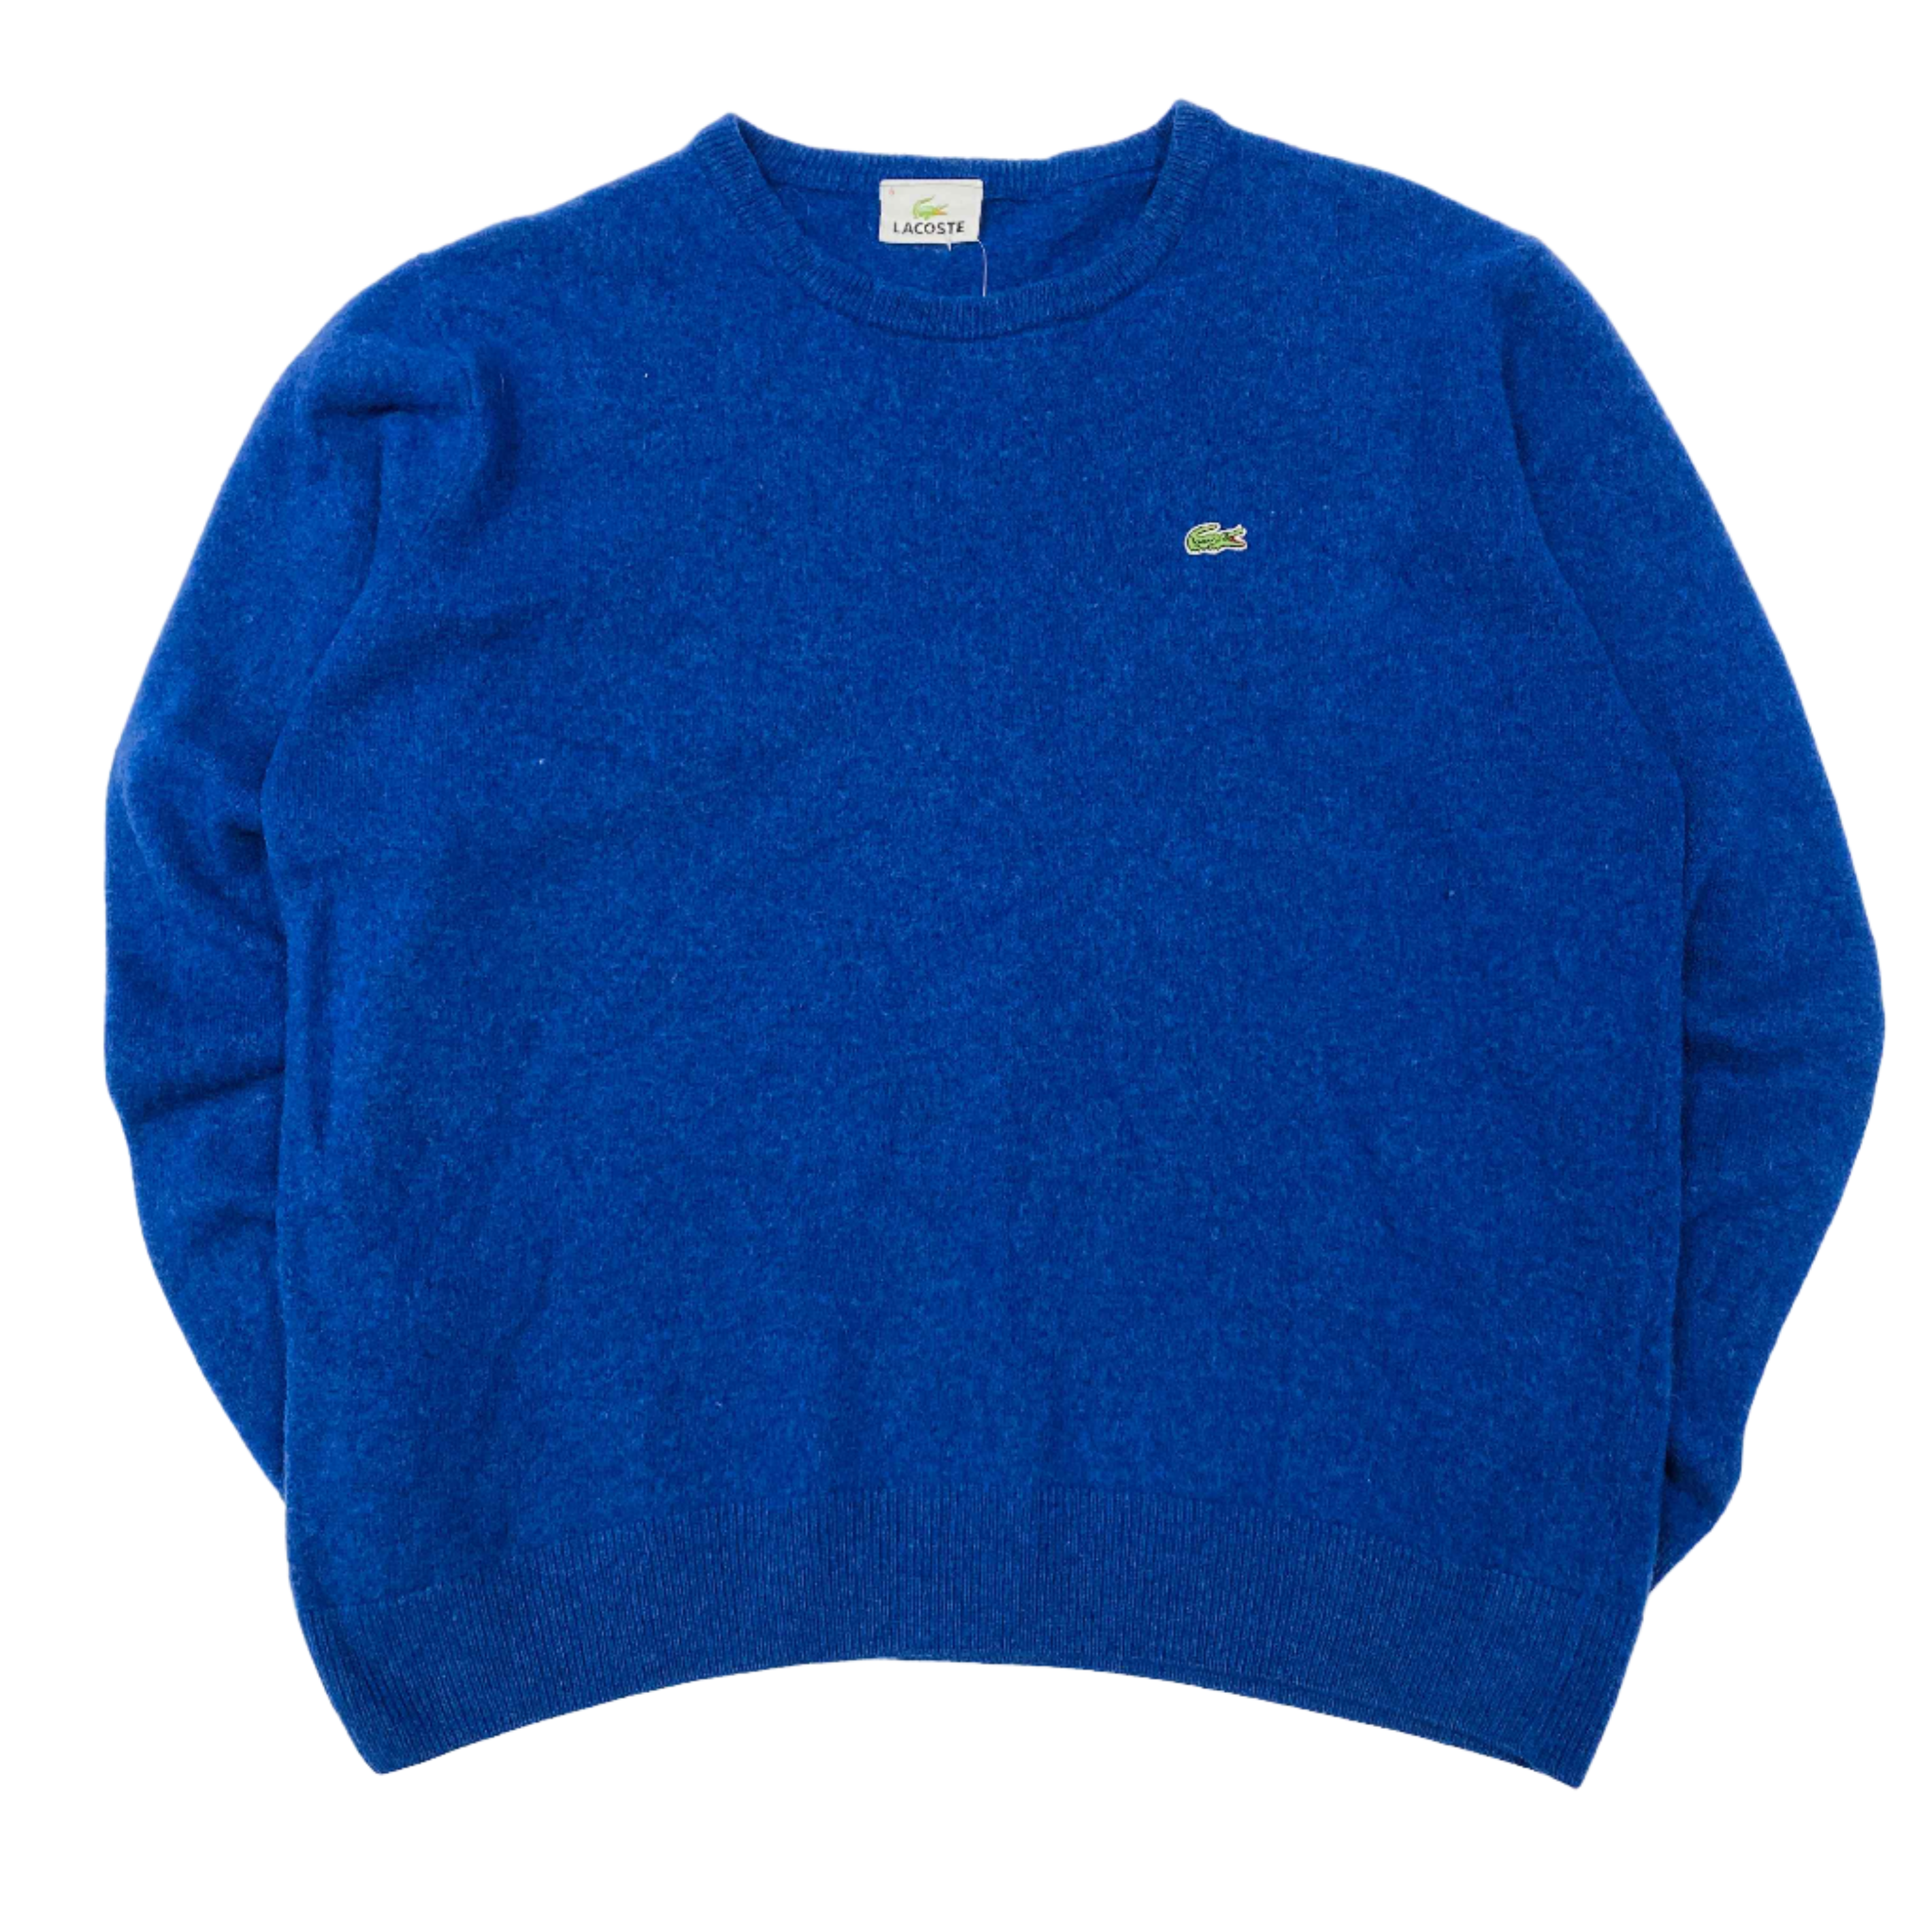 Lacoste Knitted Jumper - Large